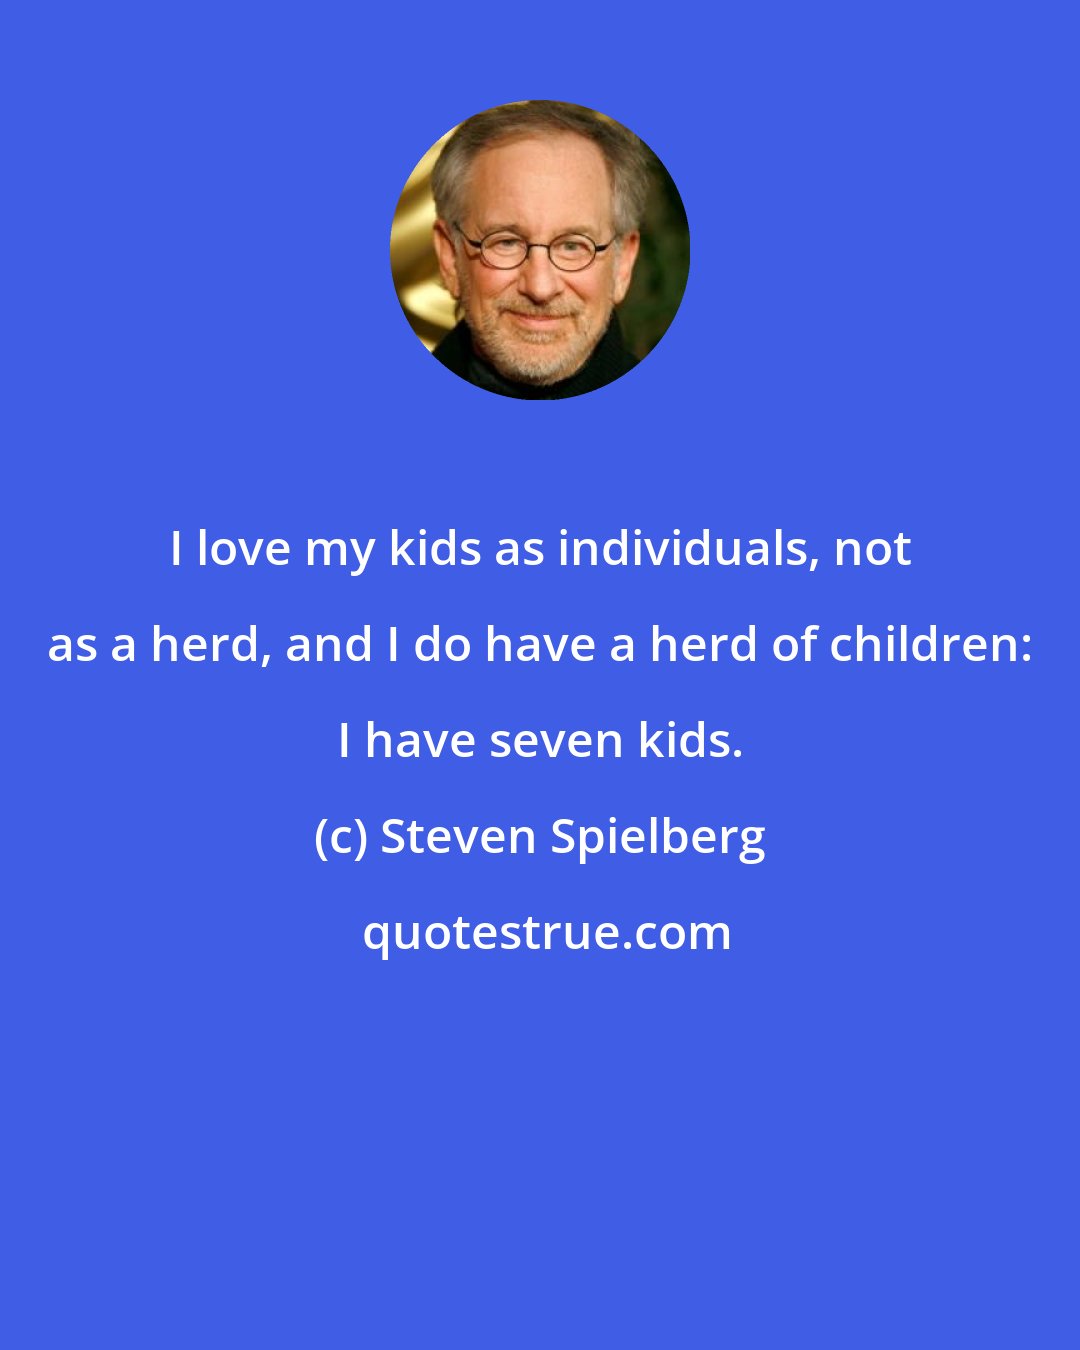 Steven Spielberg: I love my kids as individuals, not as a herd, and I do have a herd of children: I have seven kids.